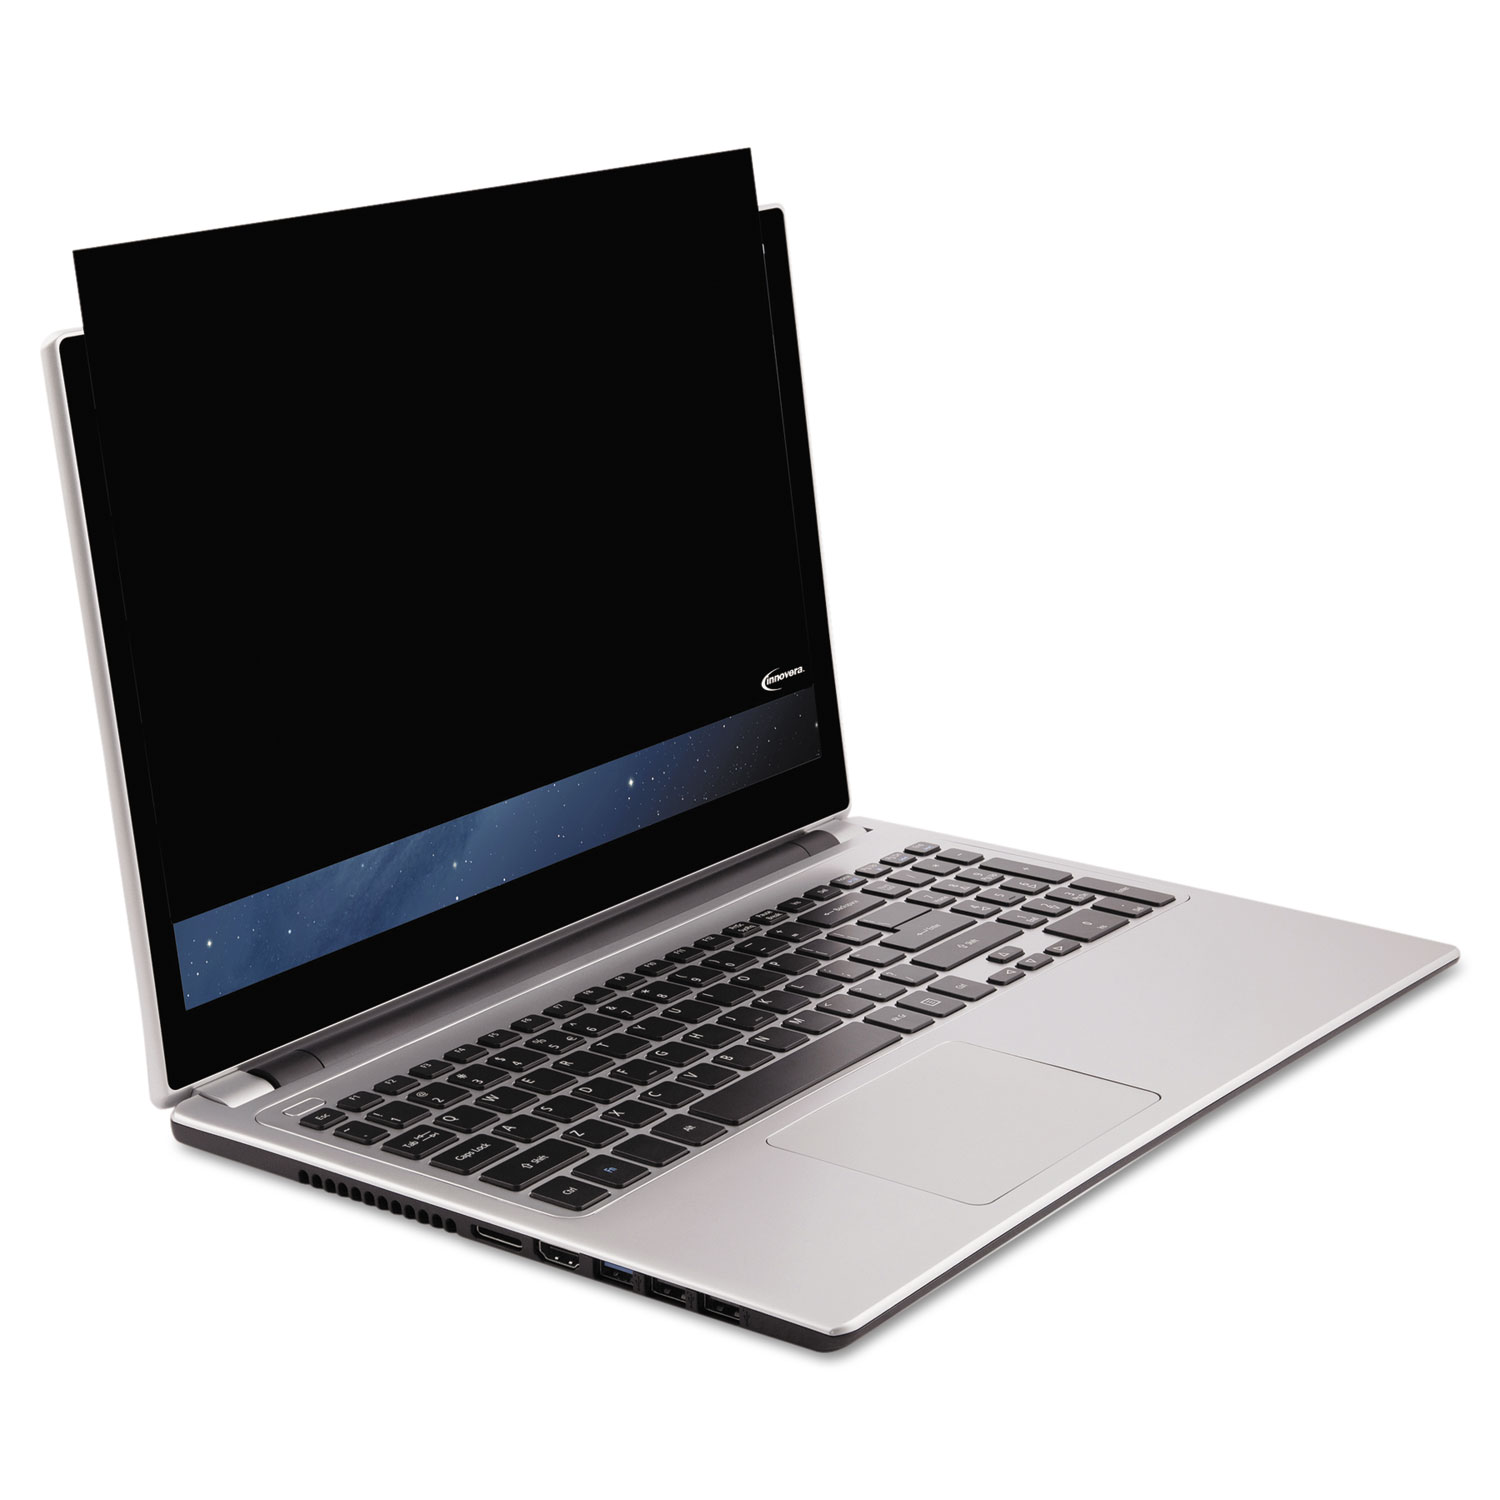 Innovera Blackout Privacy Filter For 17" Widescreen Notebook/lcd, 16:10 Aspect Ratio - image 2 of 8